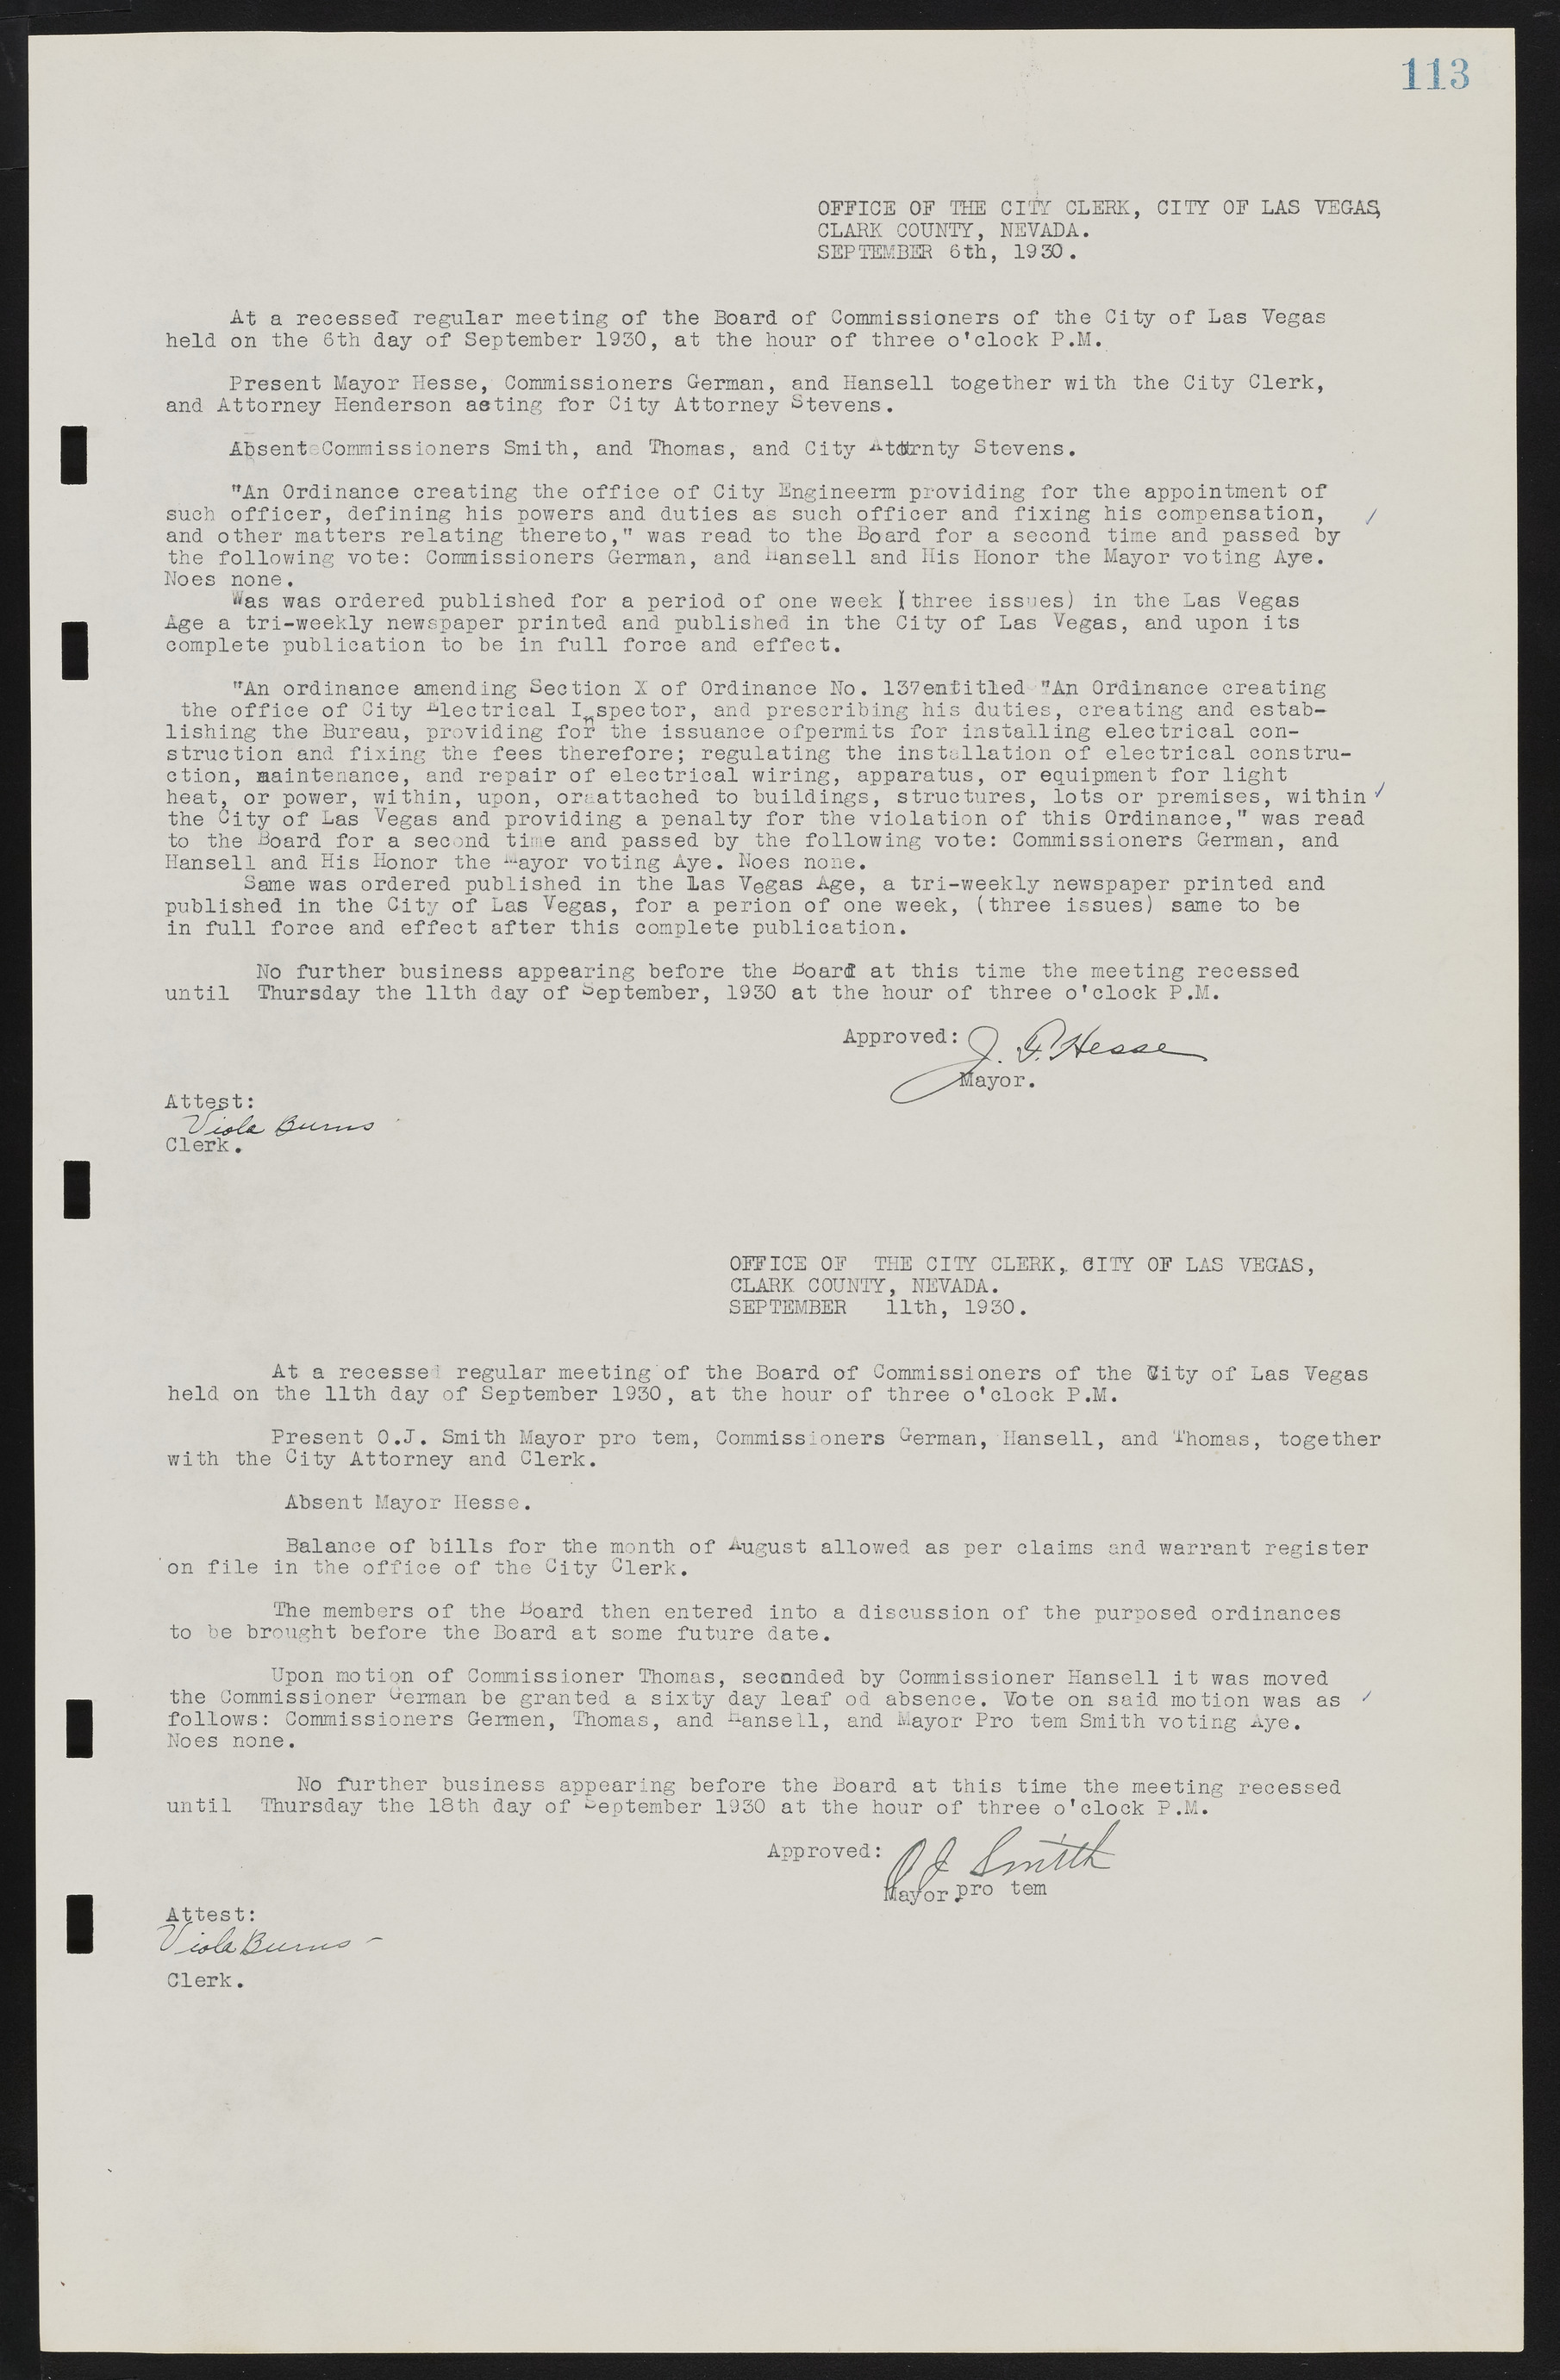 Las Vegas City Commission Minutes, May 14, 1929 to February 11, 1937, lvc000003-119